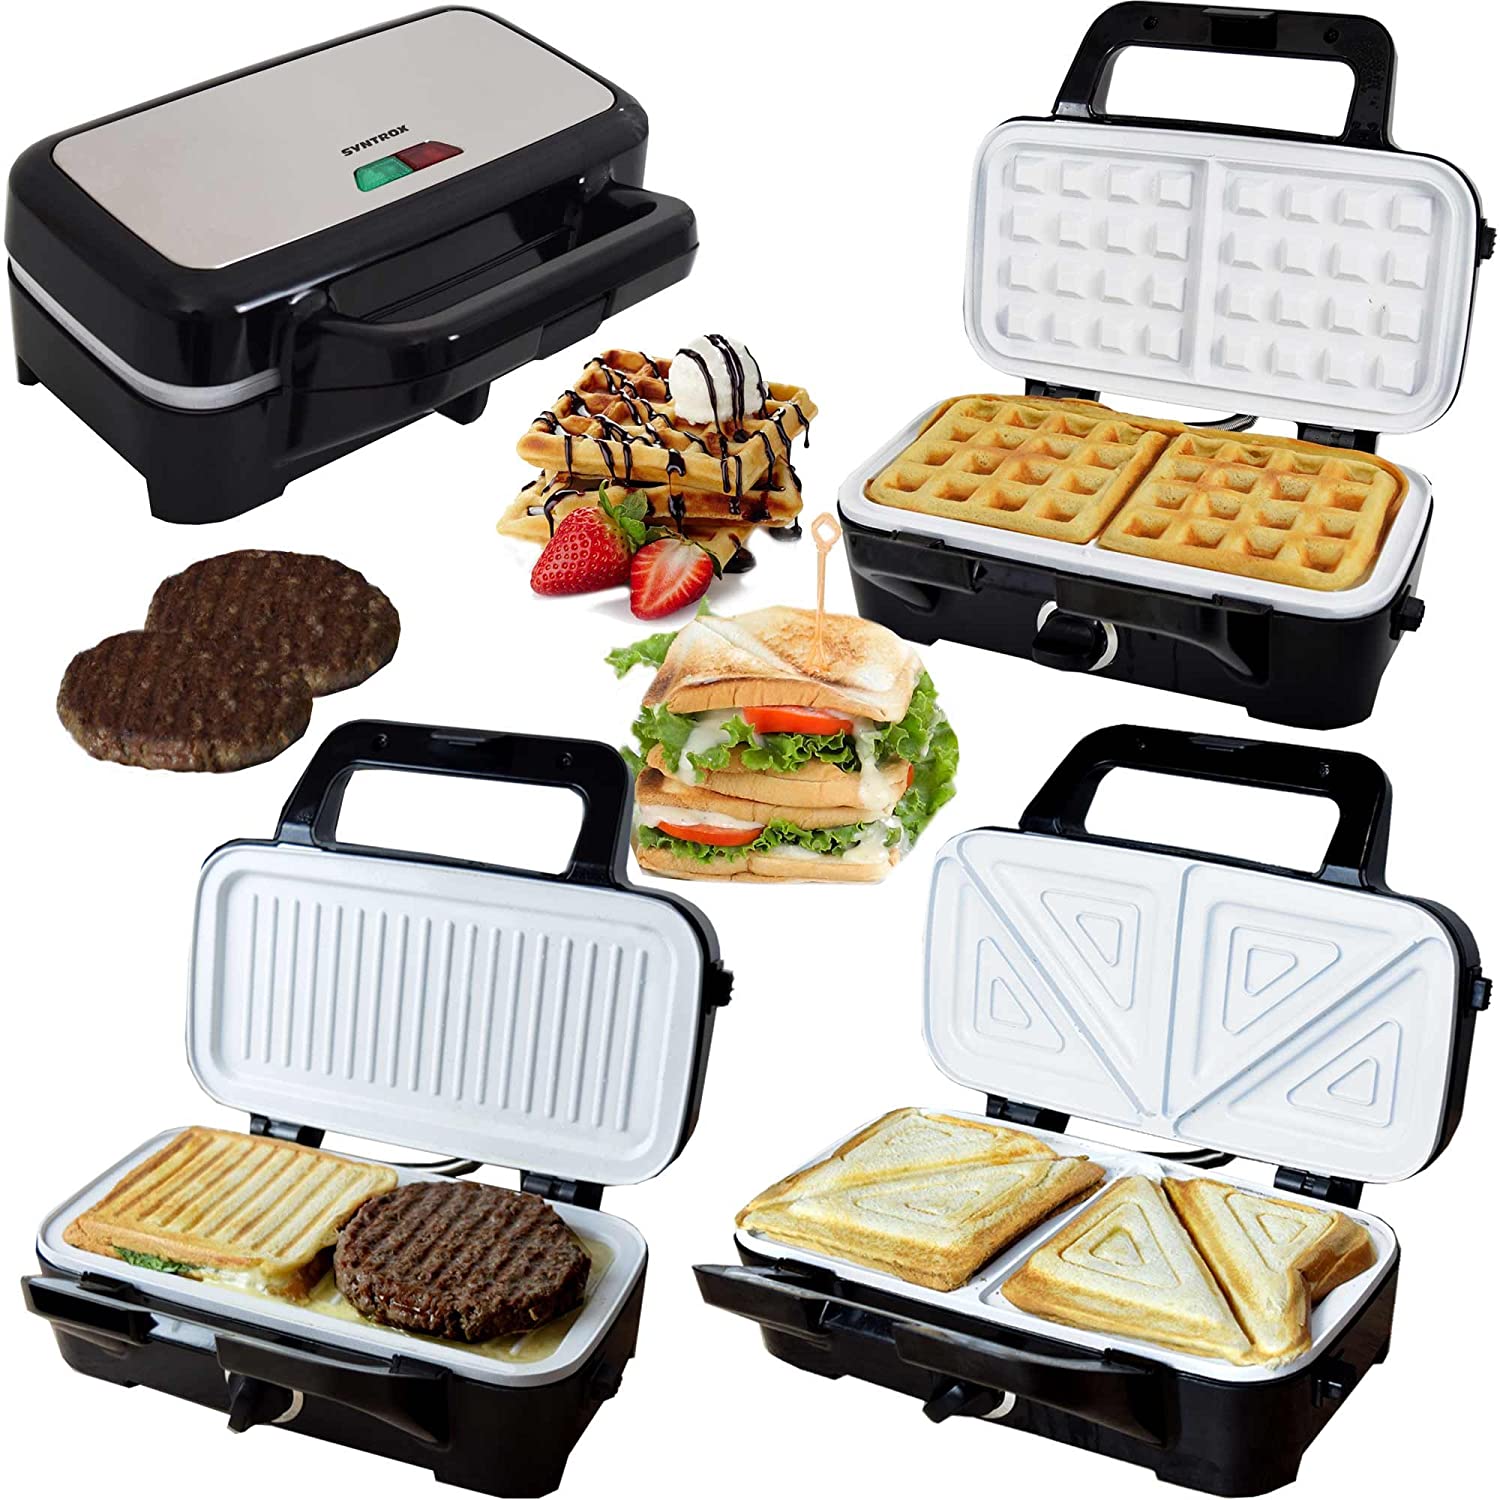 Syntrox Germany 3-in-1 ceramic multi sandwich maker + waffle iron + contact grill with 3 removable plates